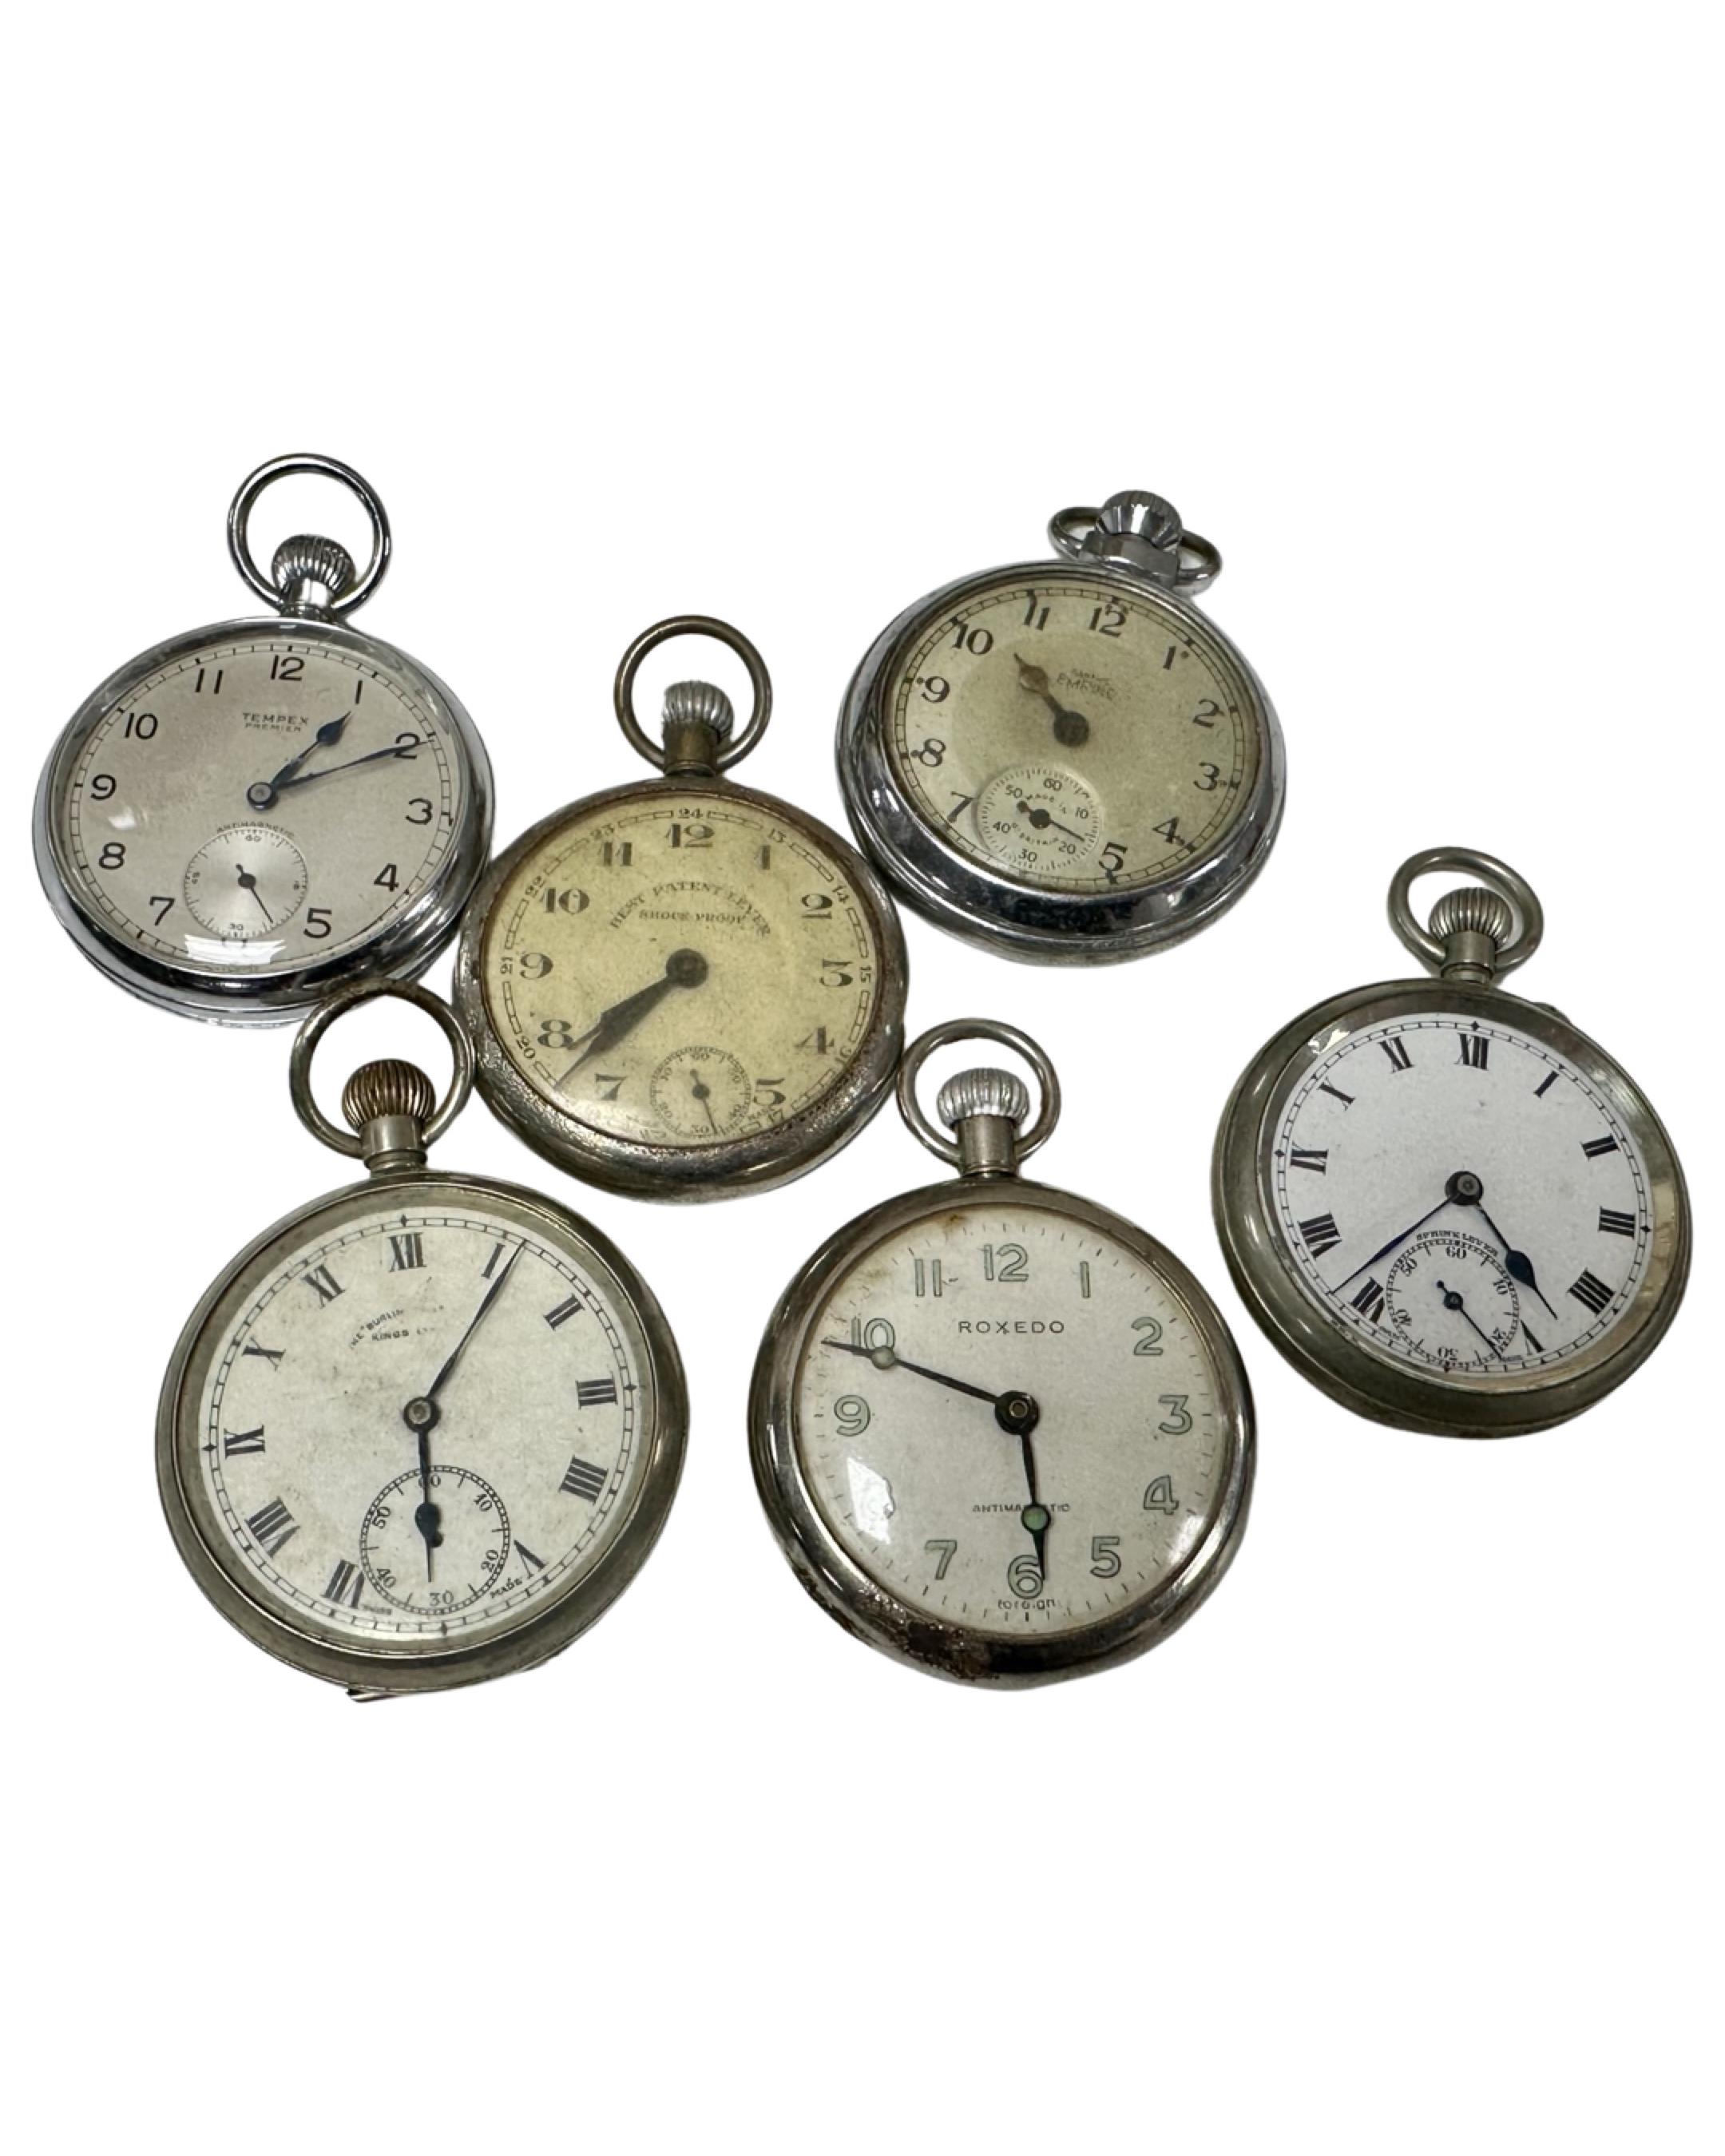 Five assorted chrome cased pocket watches.